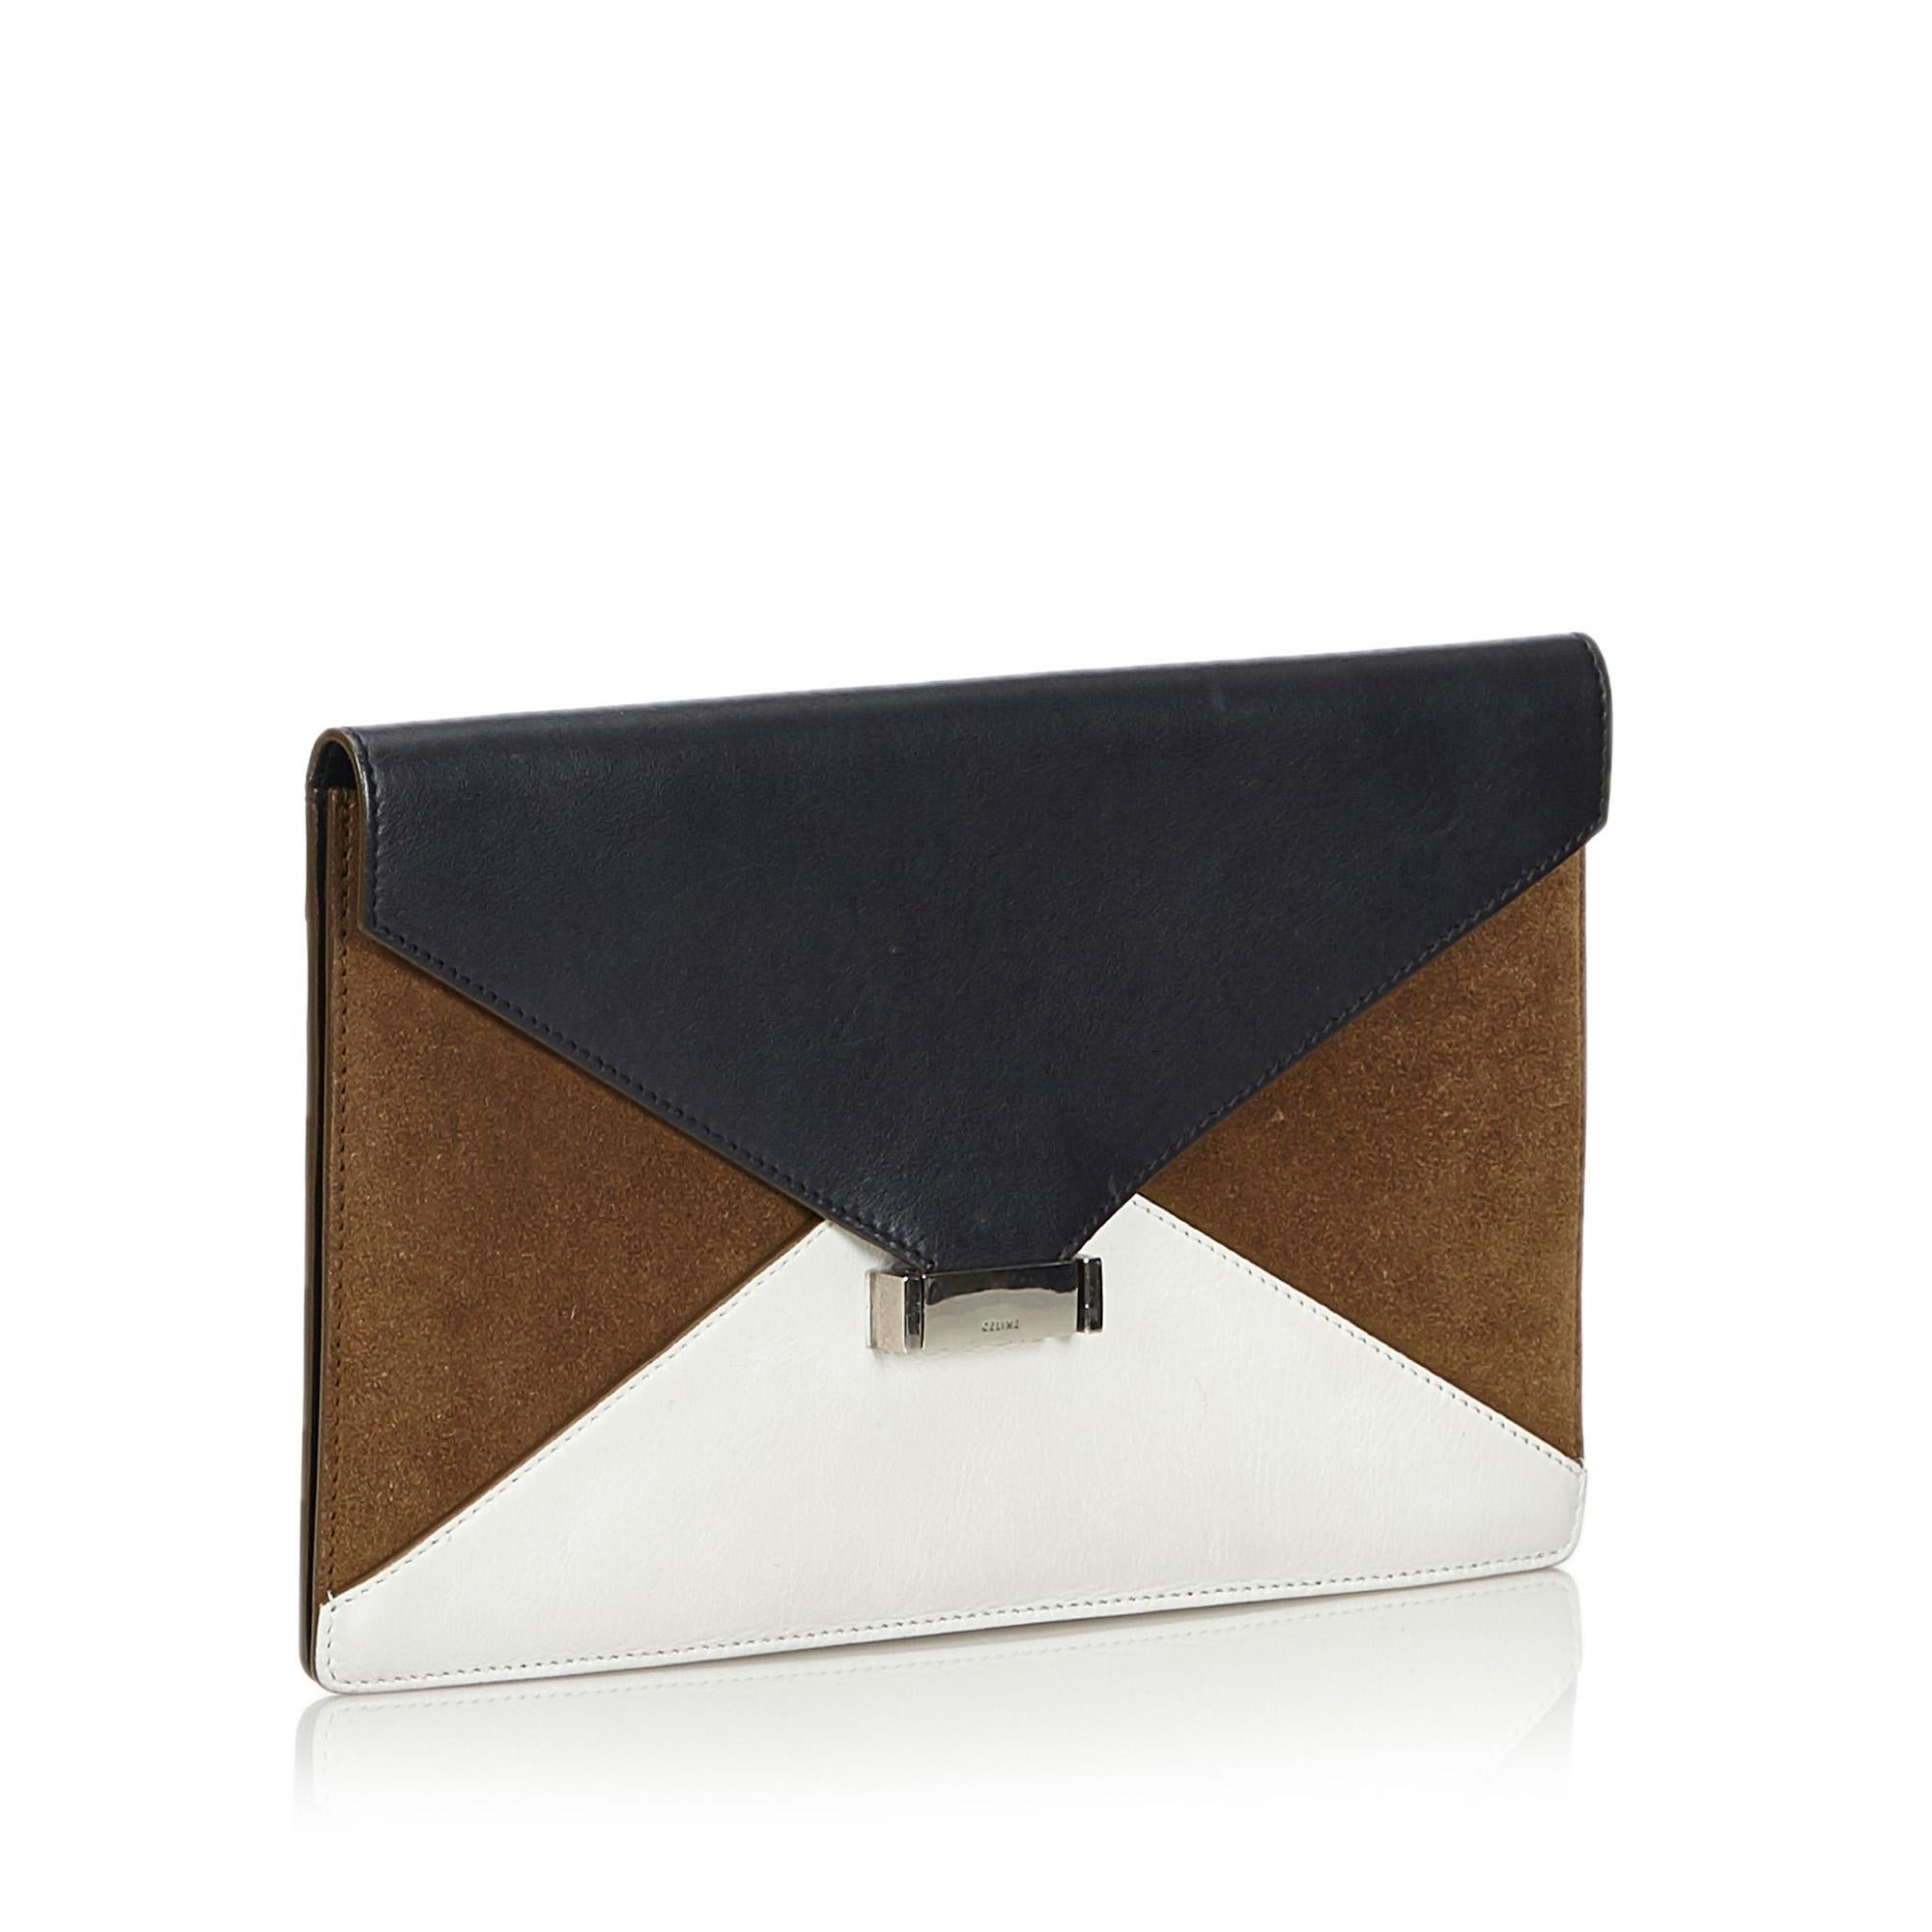 The Diamond Clutch features a leather and suede body, front flap with push lock closure, and an interior zip pocket. It carries as B+ condition rating.

Inclusions: 
This item does not come with inclusions.

Dimensions:
Length: 17.00 cm
Width: 27.50